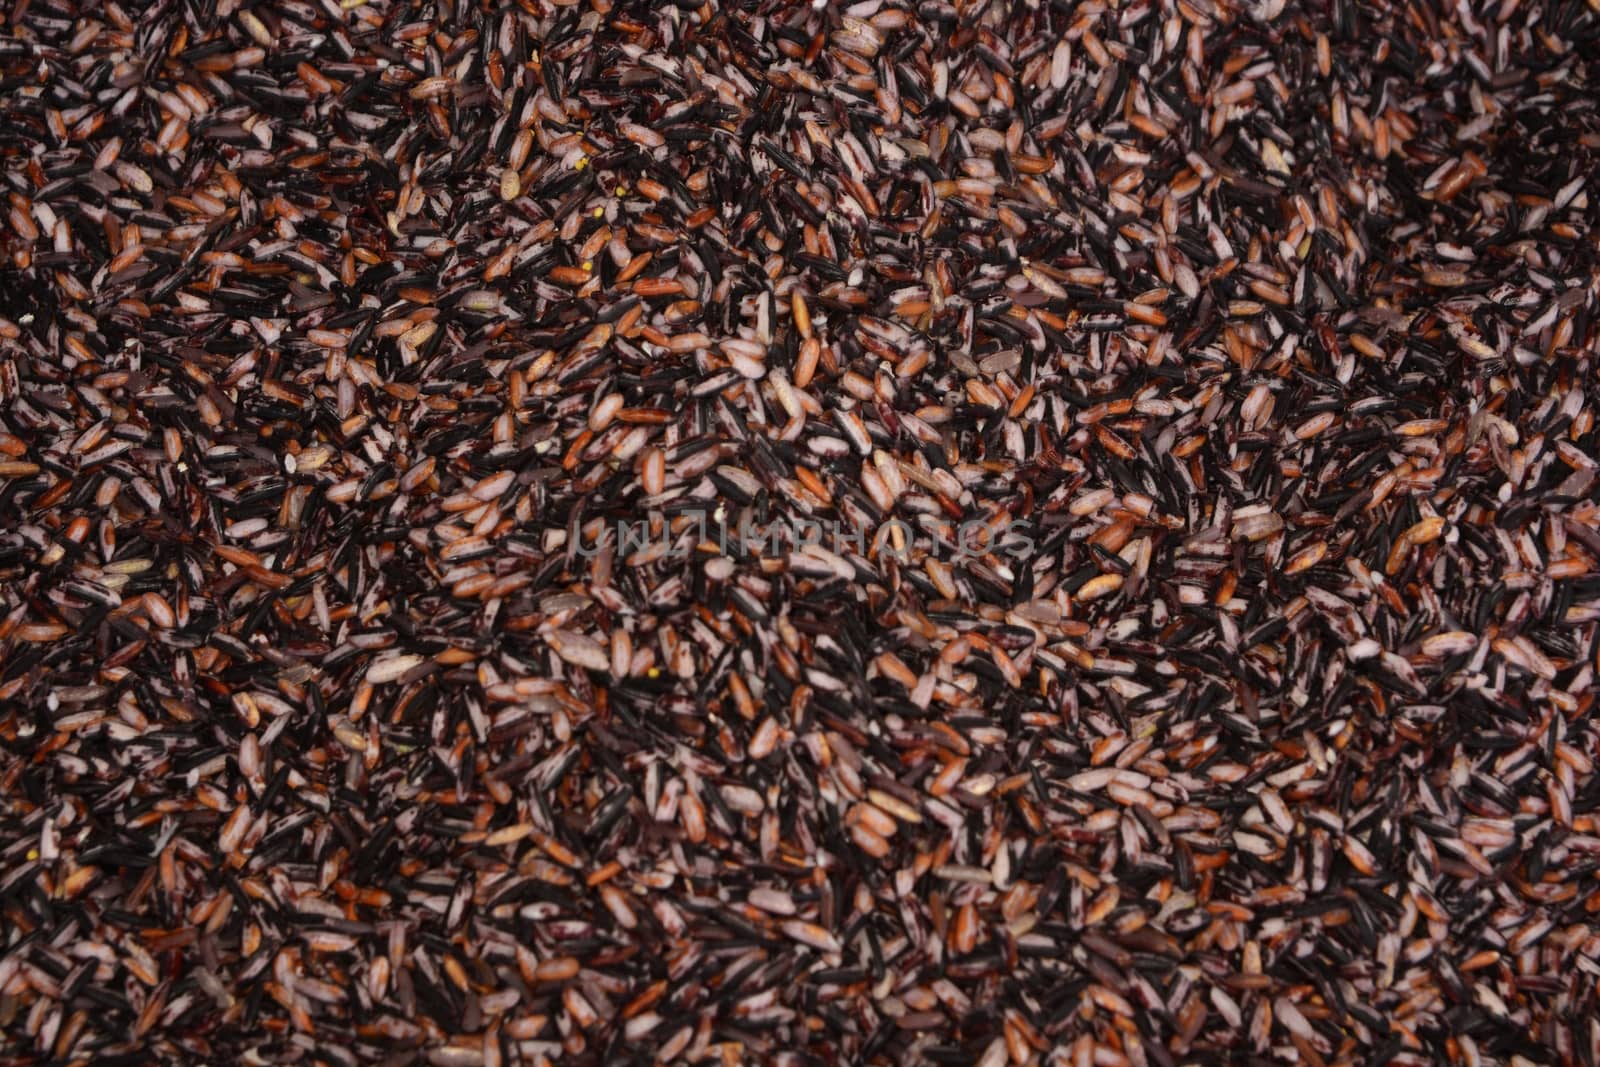 Soft focus of Aromatic Black Rice or Rice Berry by ideation90